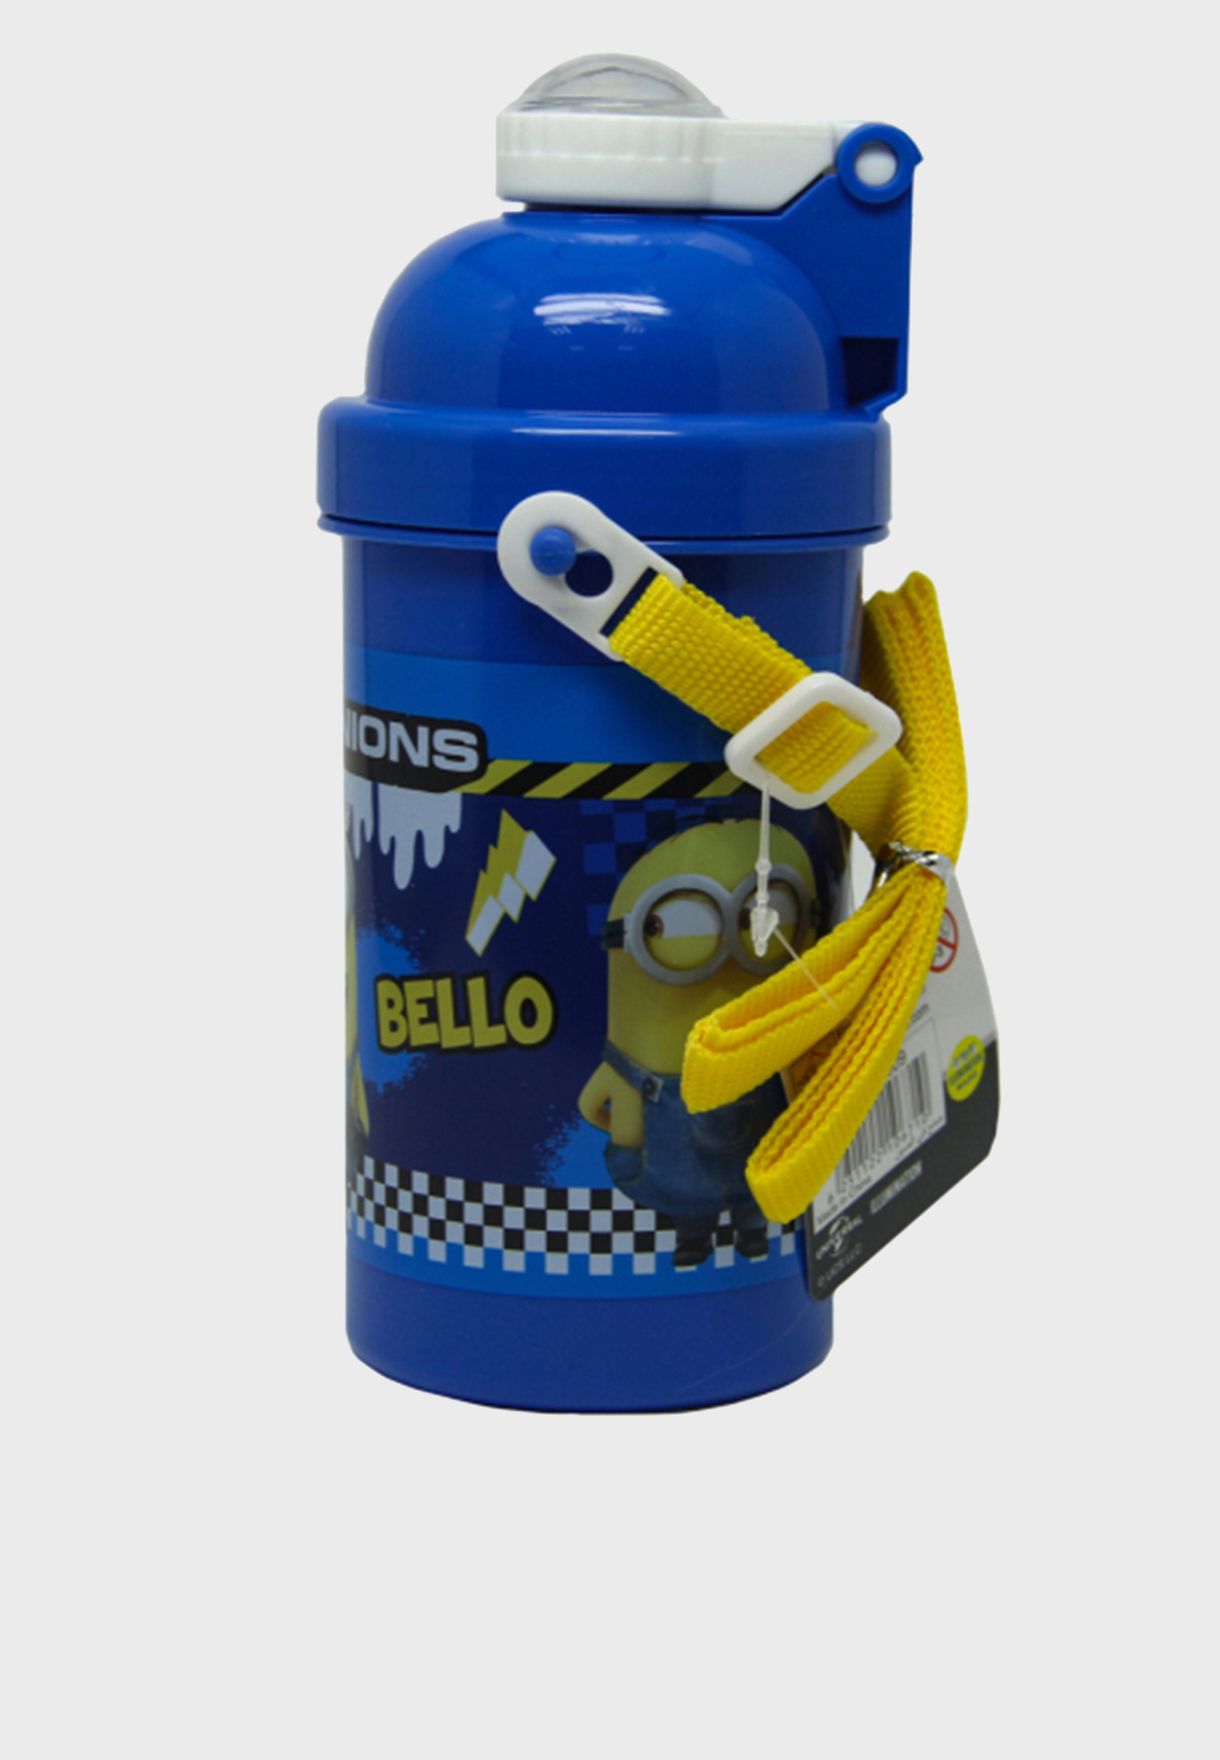 Minions: The Rise Of Gru Waterbottle